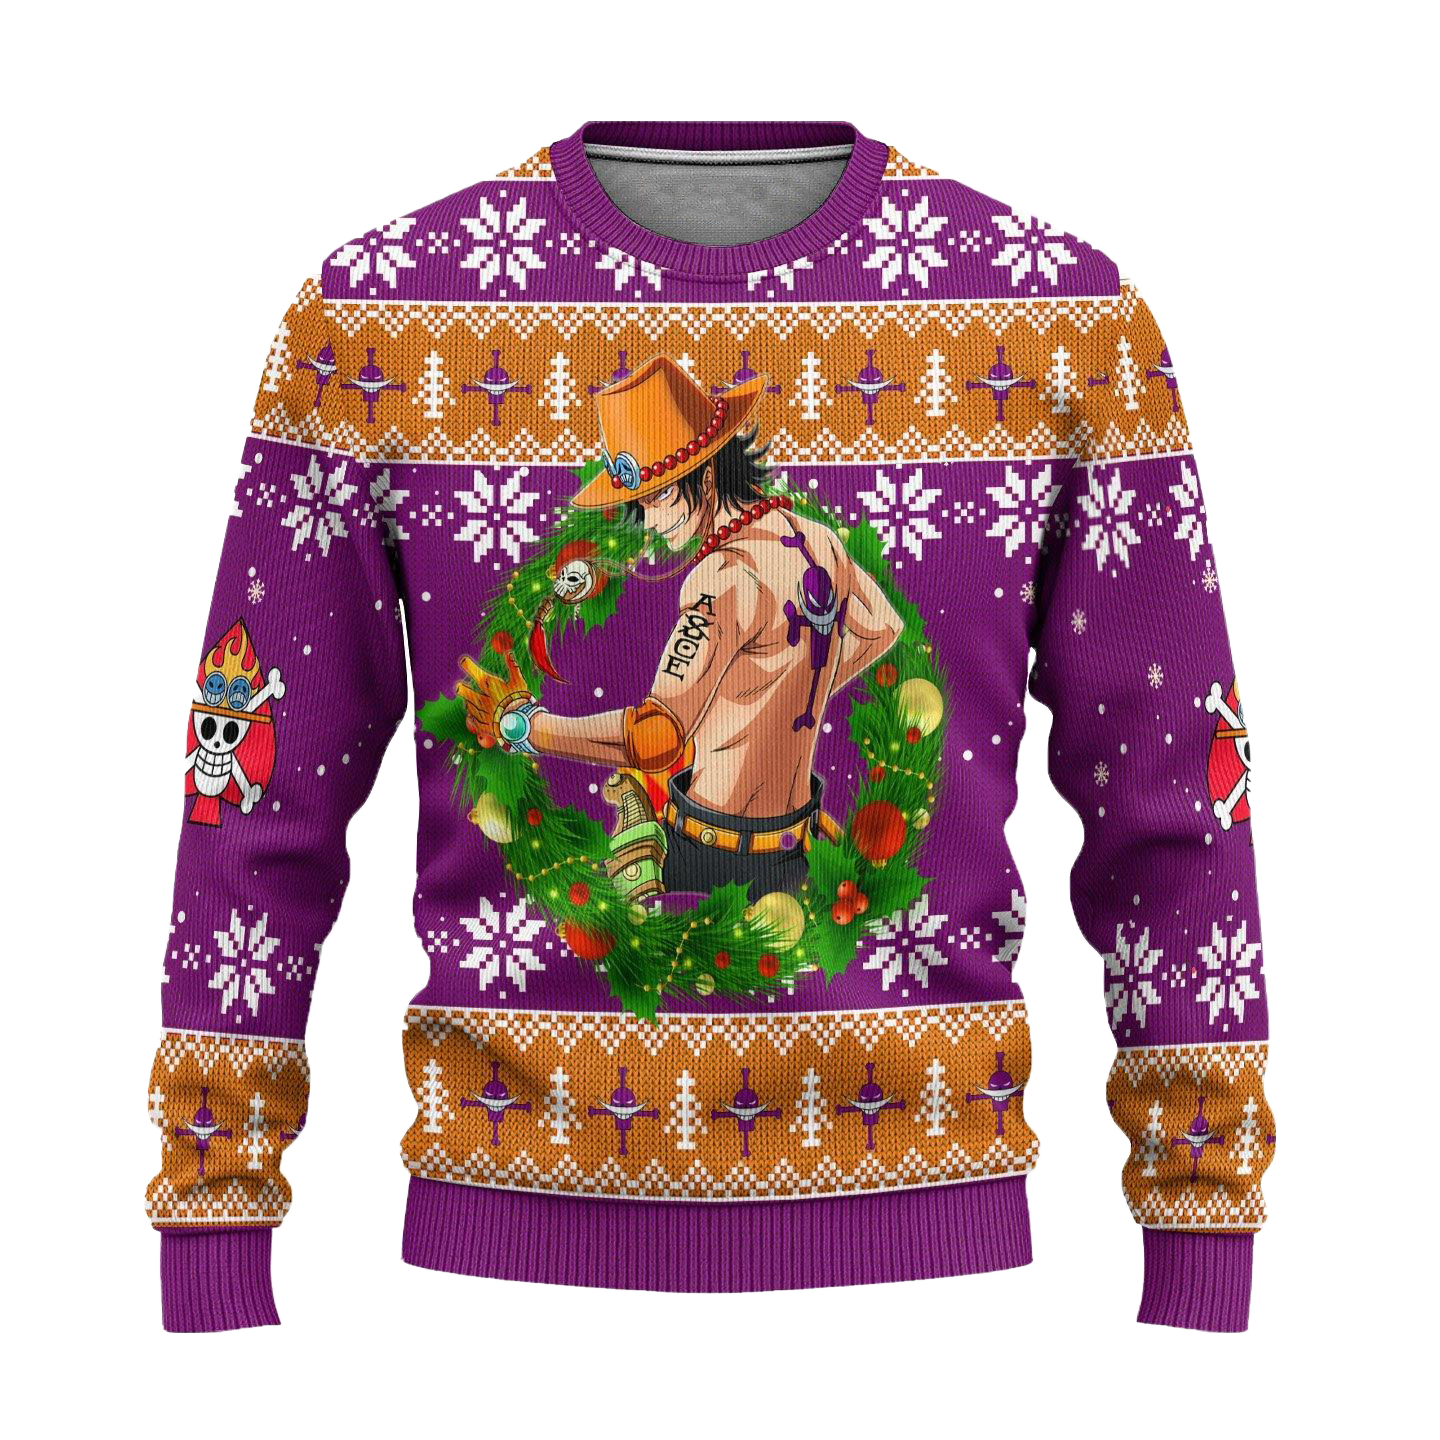 Portgas D Ace One Piece Anime Ugly Christmas Sweater Xmas Gift